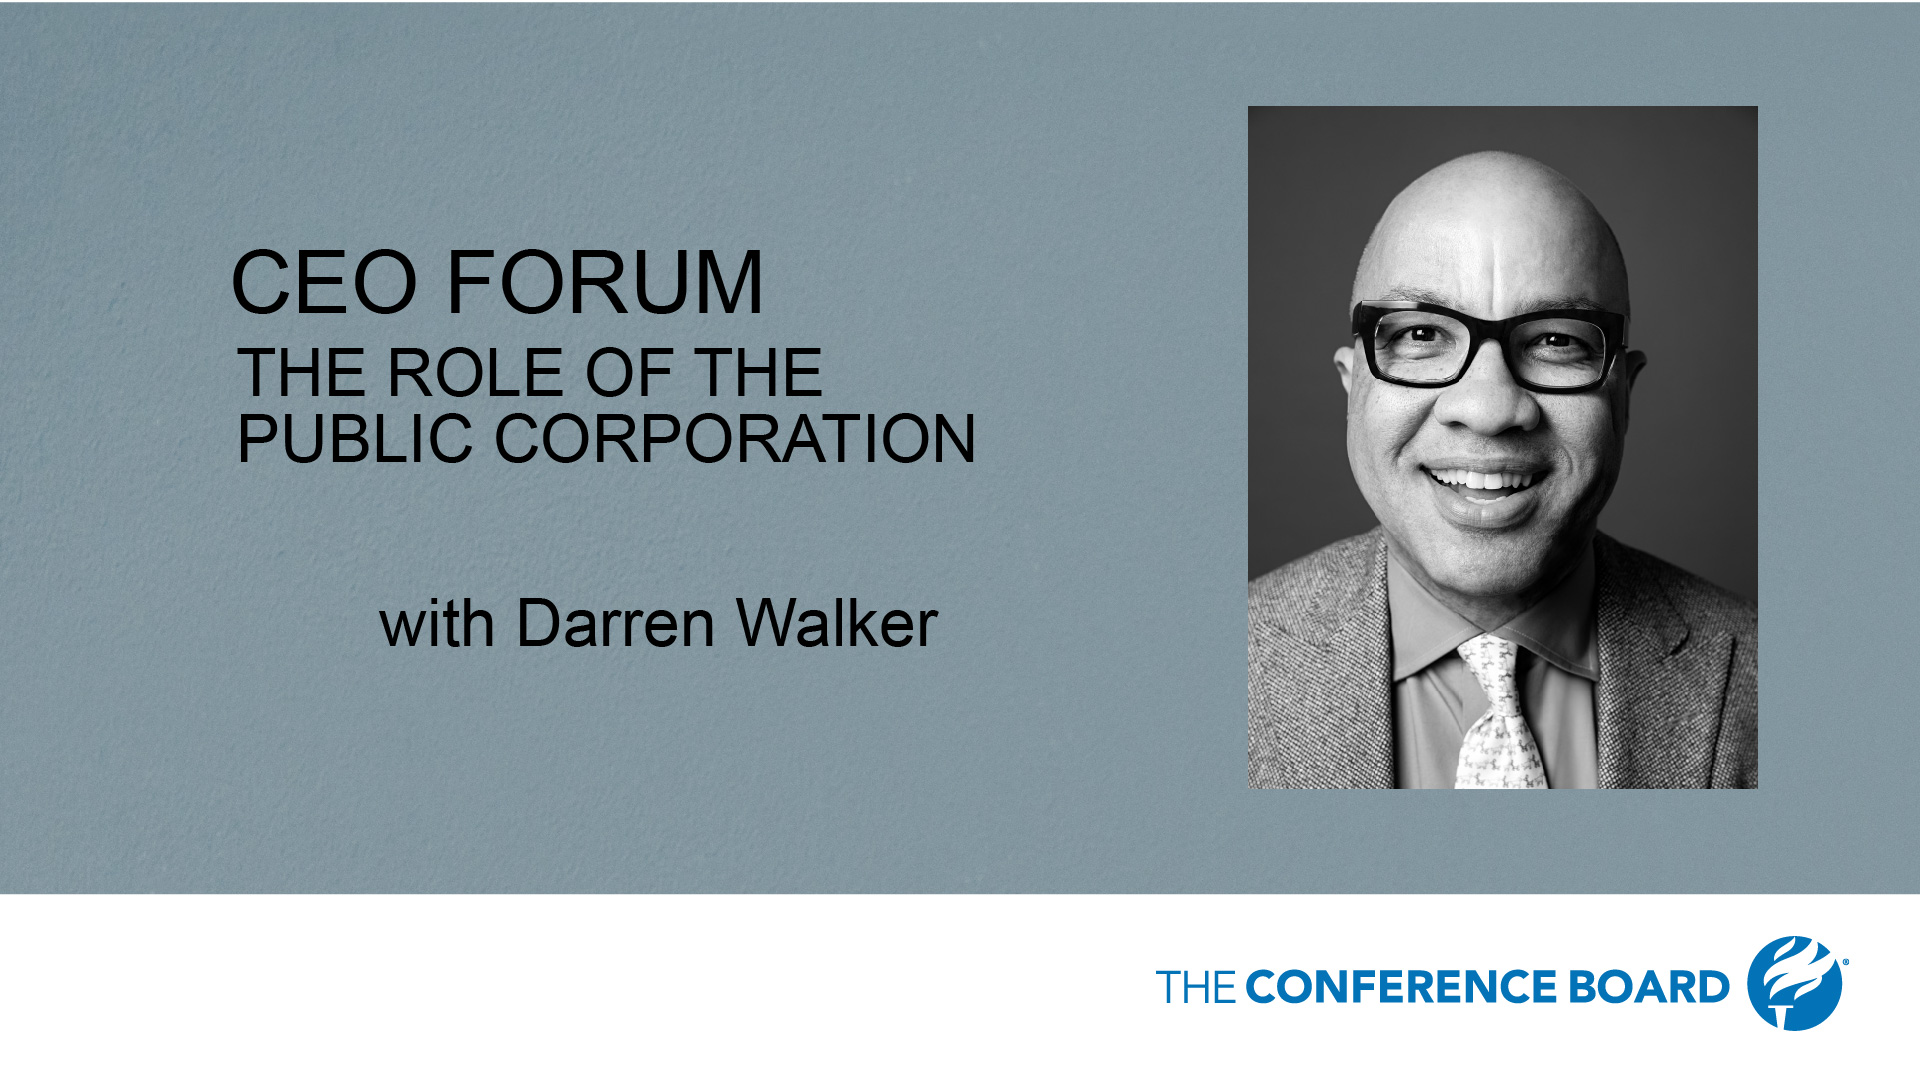 Ford Foundation President, Darren Walker on Paradigm Shift within Corporate America Following the Death of George Floyd